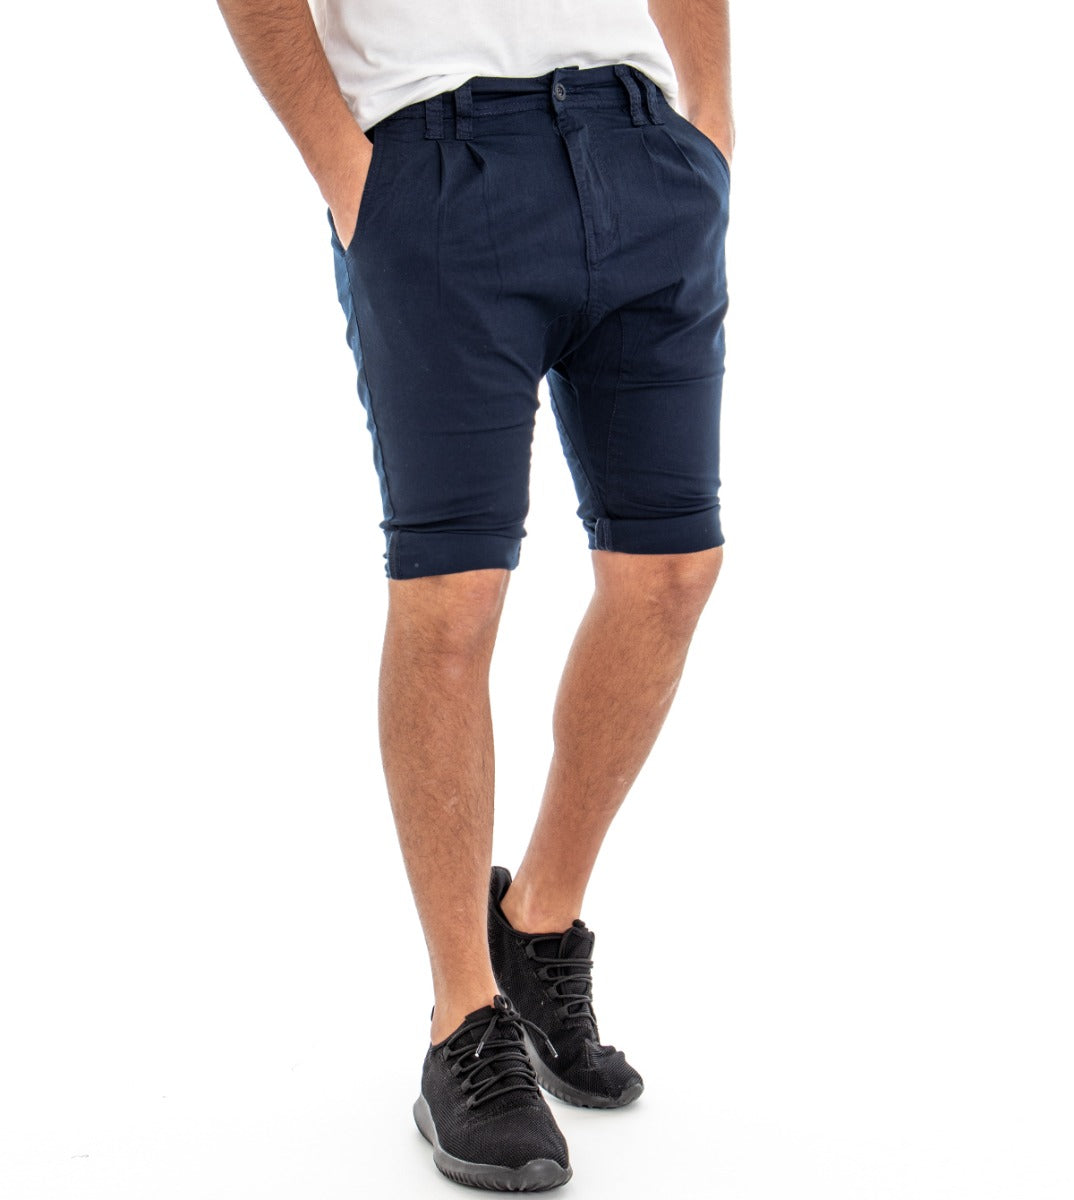 Bermuda Short Men's Shorts Blue Pence Solid Color Low Crotch GIOSAL-PC1305A